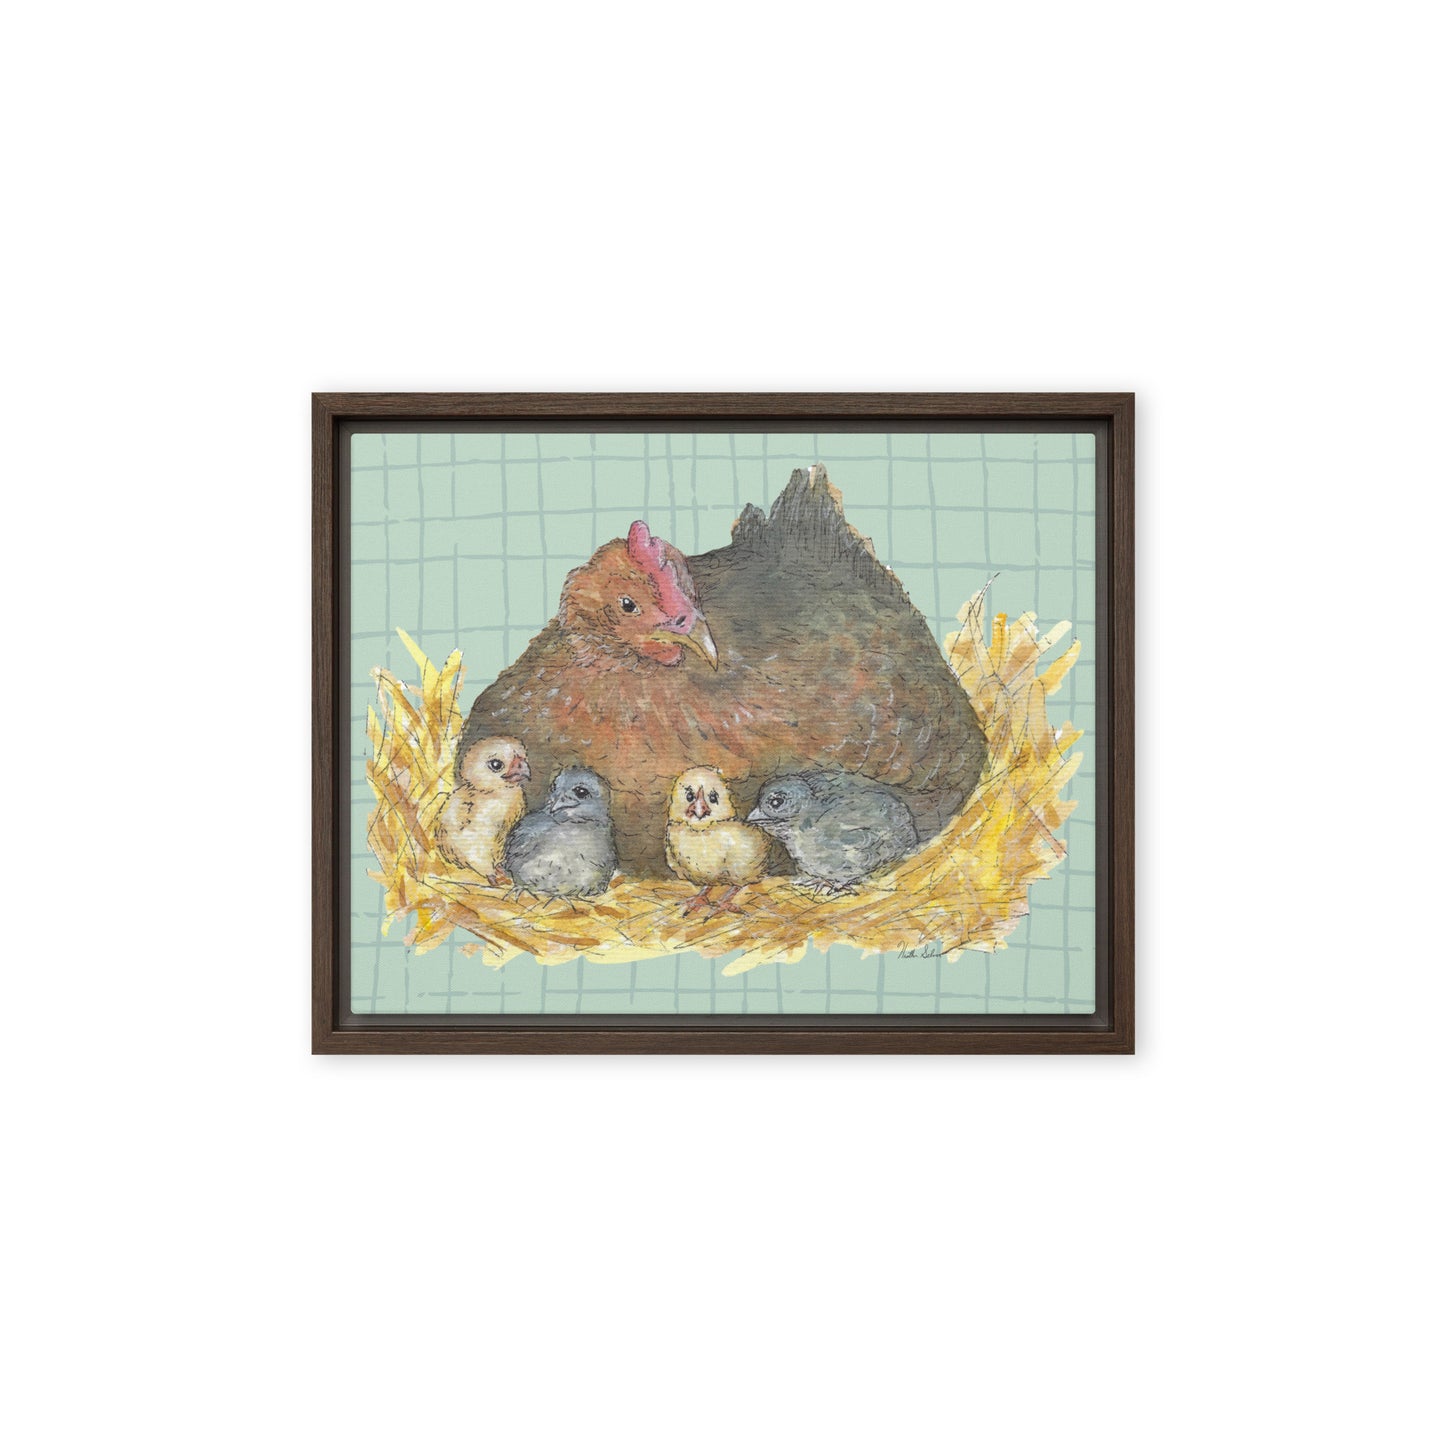 11 by 14 inch Mother Hen Floating Frame Canvas Wall Art. Heather Silver's watercolor painting, Mother Hen, with a green crosshatched background, printed on a stretched canvas and framed with a dark brown pine frame. Hanging hardware included.